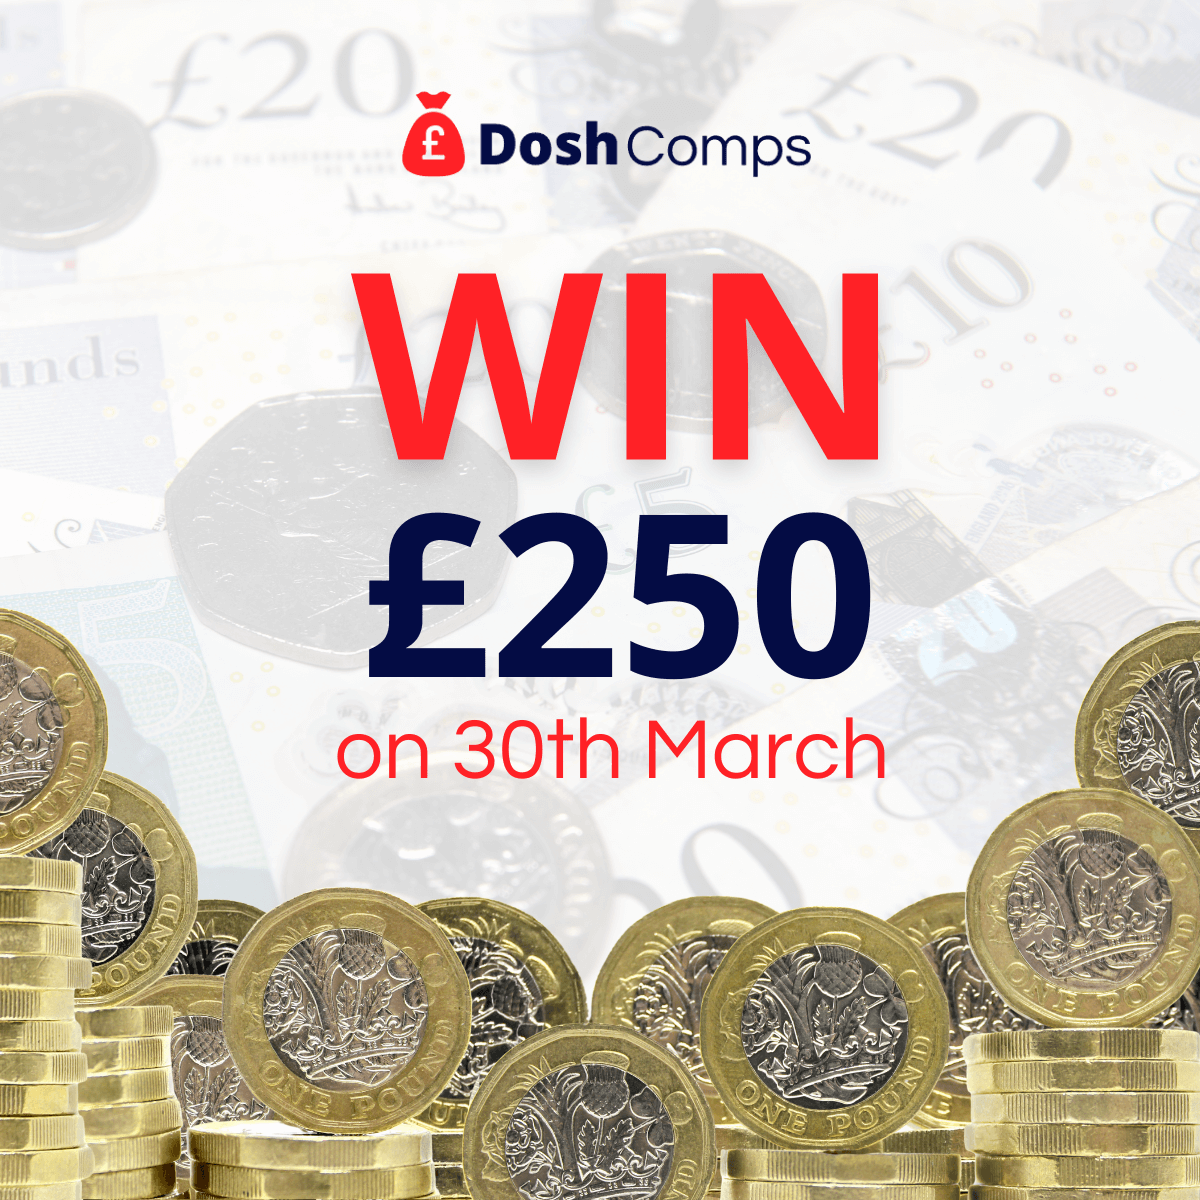 We've had 5 x £50 winners today 💸😀 ... and another £250 will be won tomorrow! 👍 Feeling lucky? 🍀 Grab your tickets at 👉 doshcomps.co.uk #inittowinit #prizes #prizesuk #prizedraw #prizewinner #prizegiveway #winners #competitionuk #prizesuk #win #doshcomps